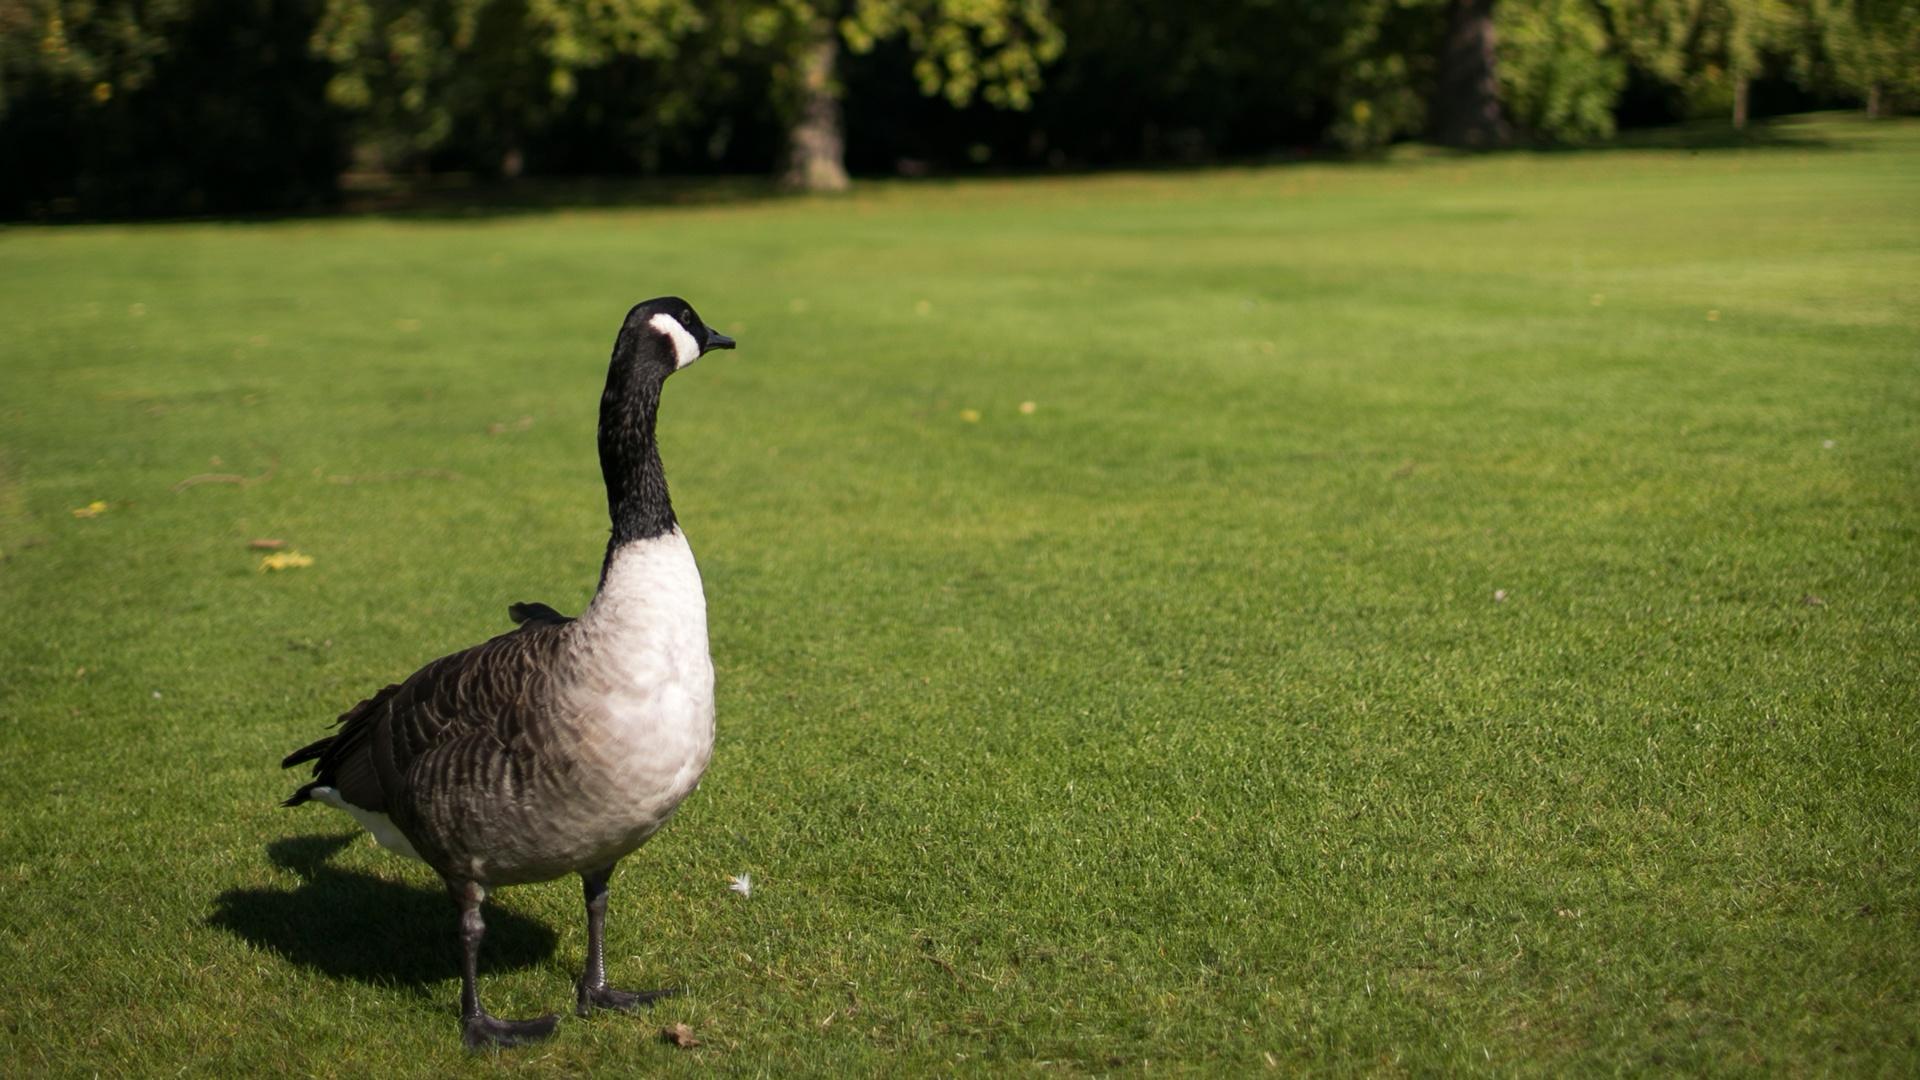 Canada Goose on the lawn at Buckingham Palace.